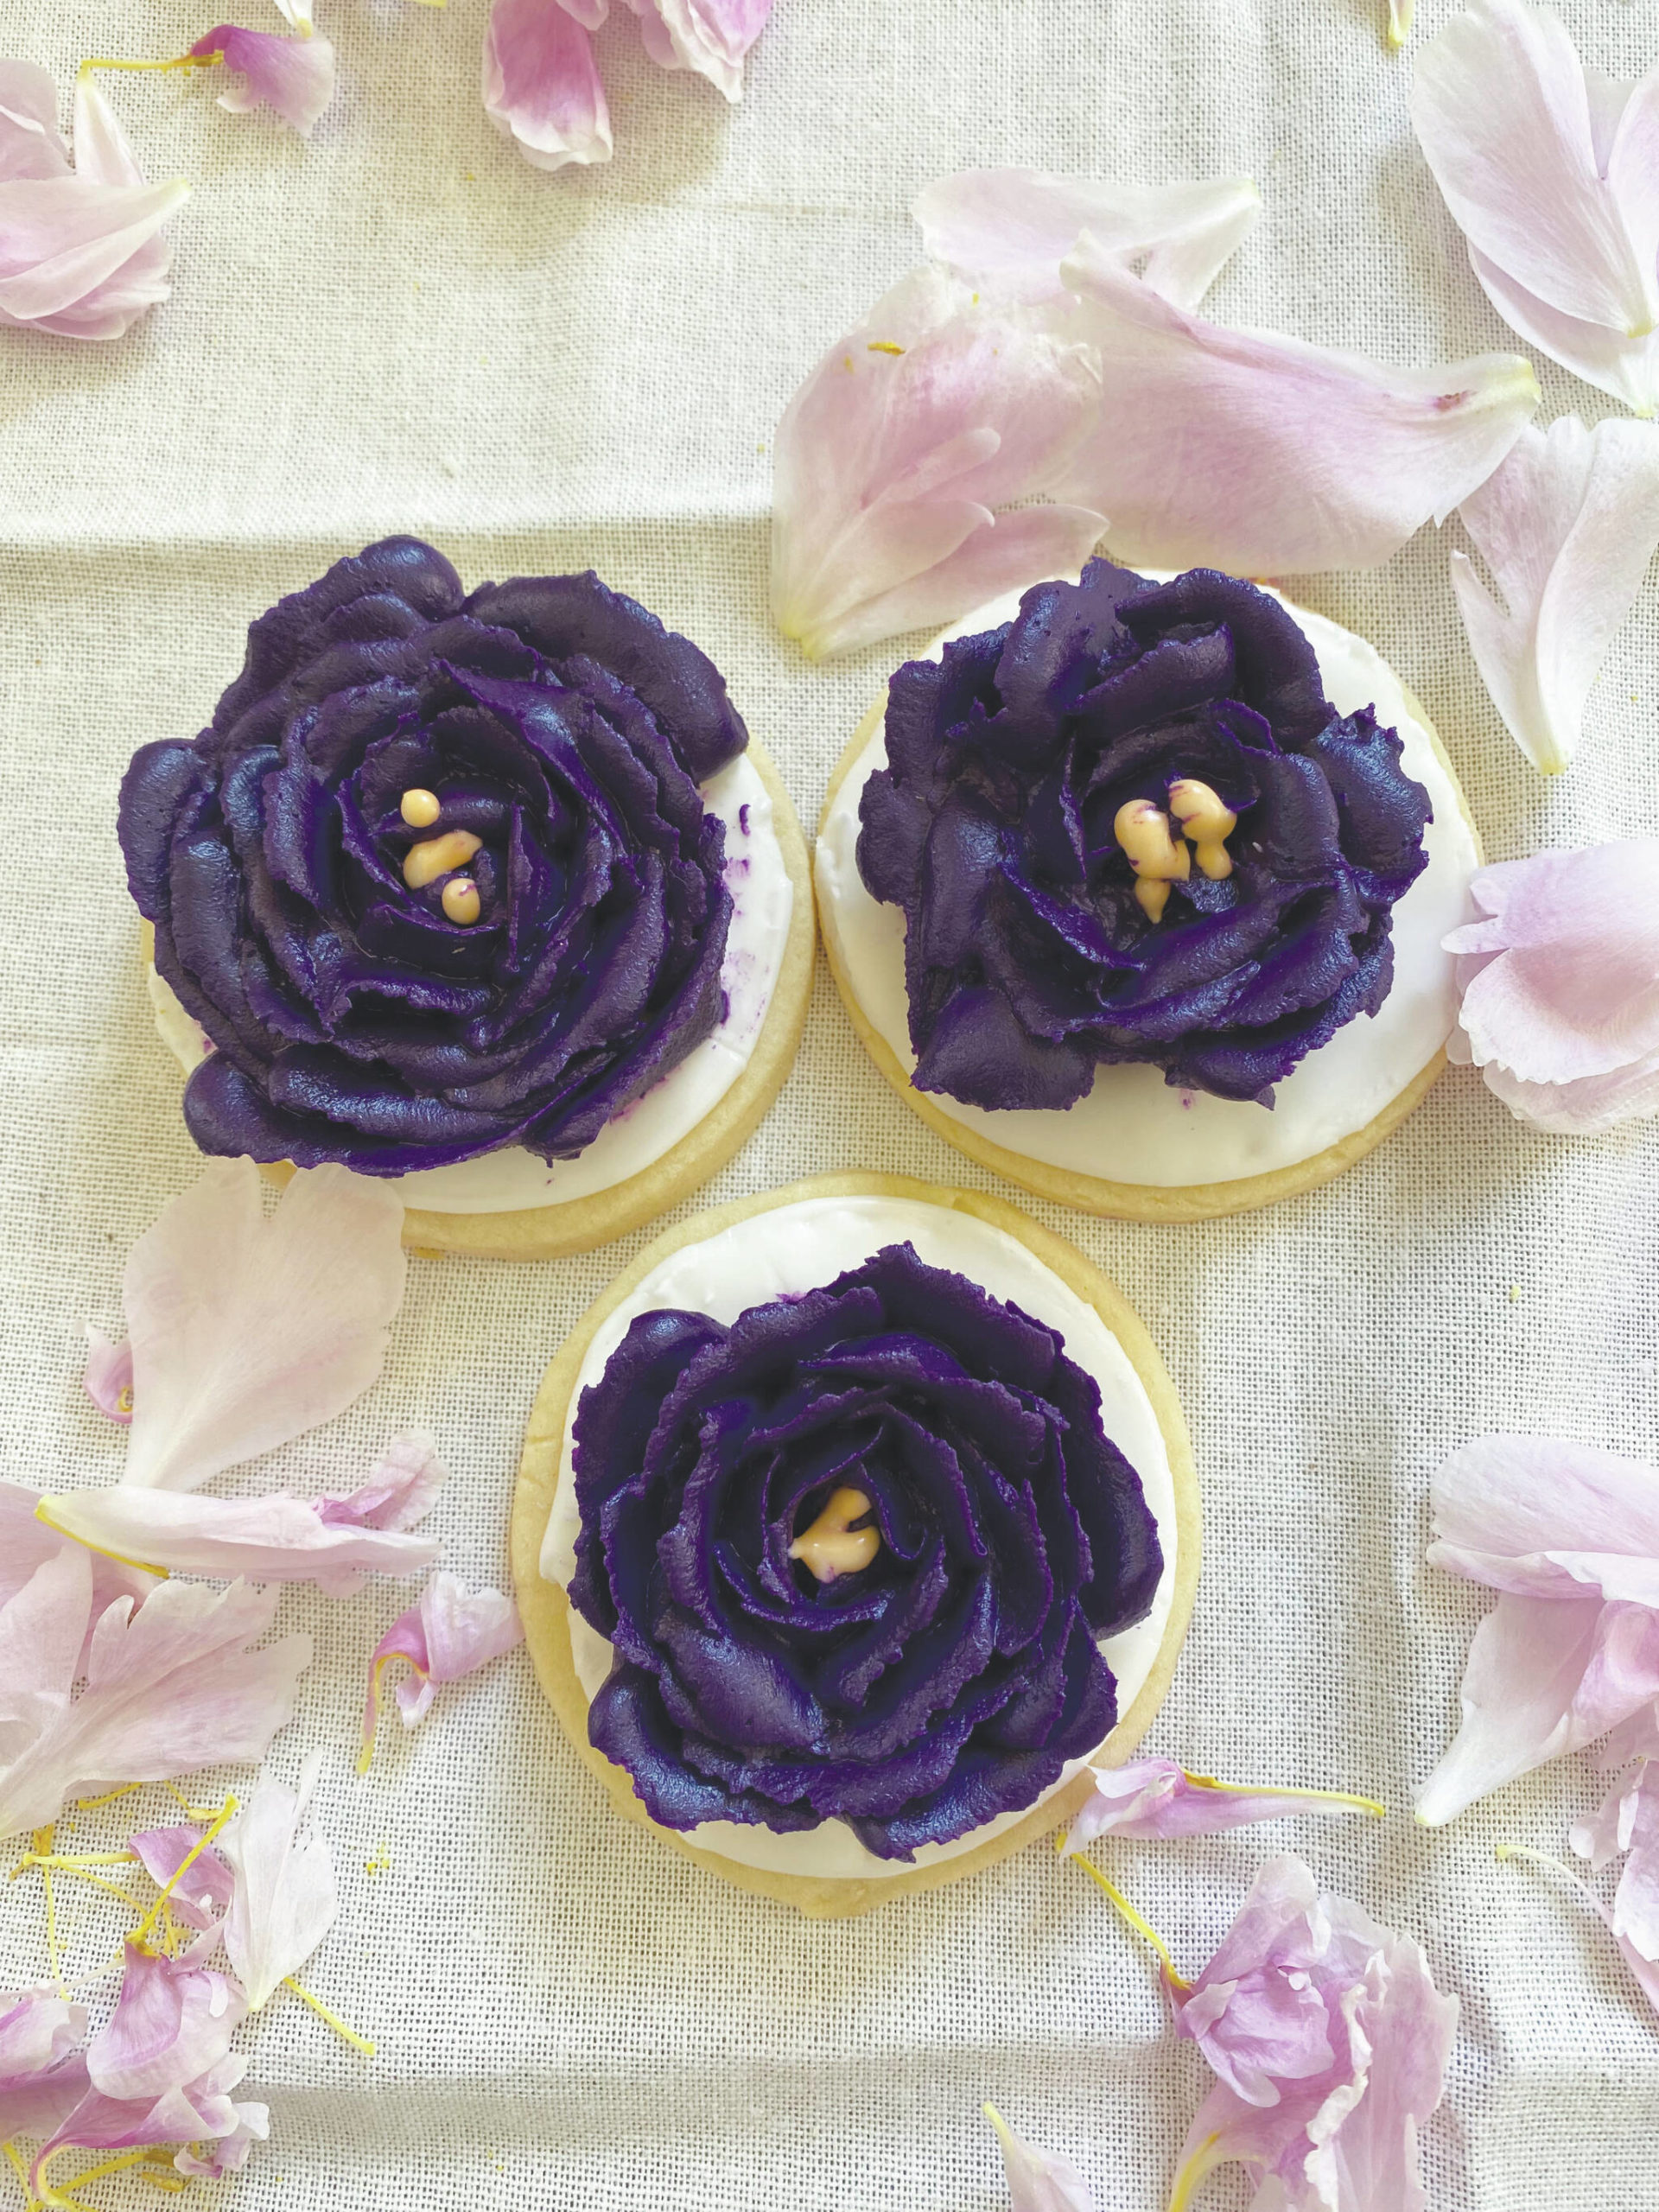 Photo by Tressa Dale/Peninsula Clarion 
Sugar cookies are decorated with flowers of royal icing.